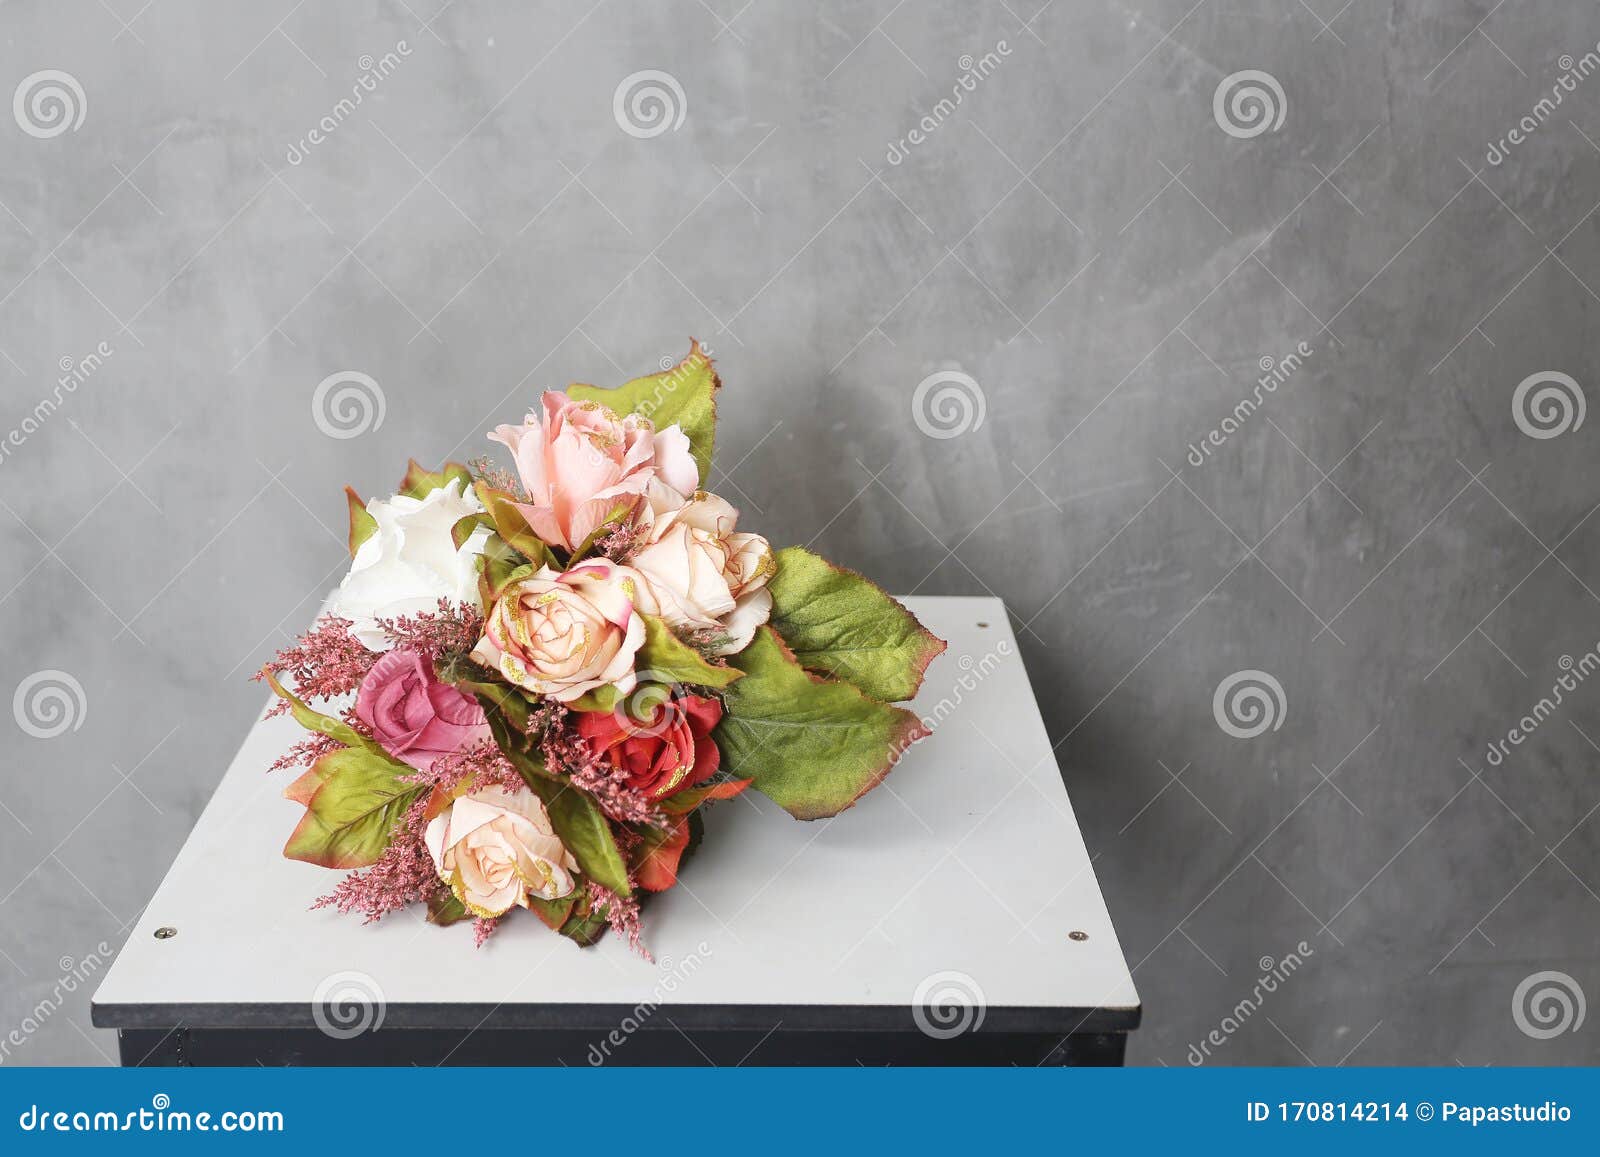 Beautiful Bouquet of Roses for Valentine S Day Stock Photo - Image of ...